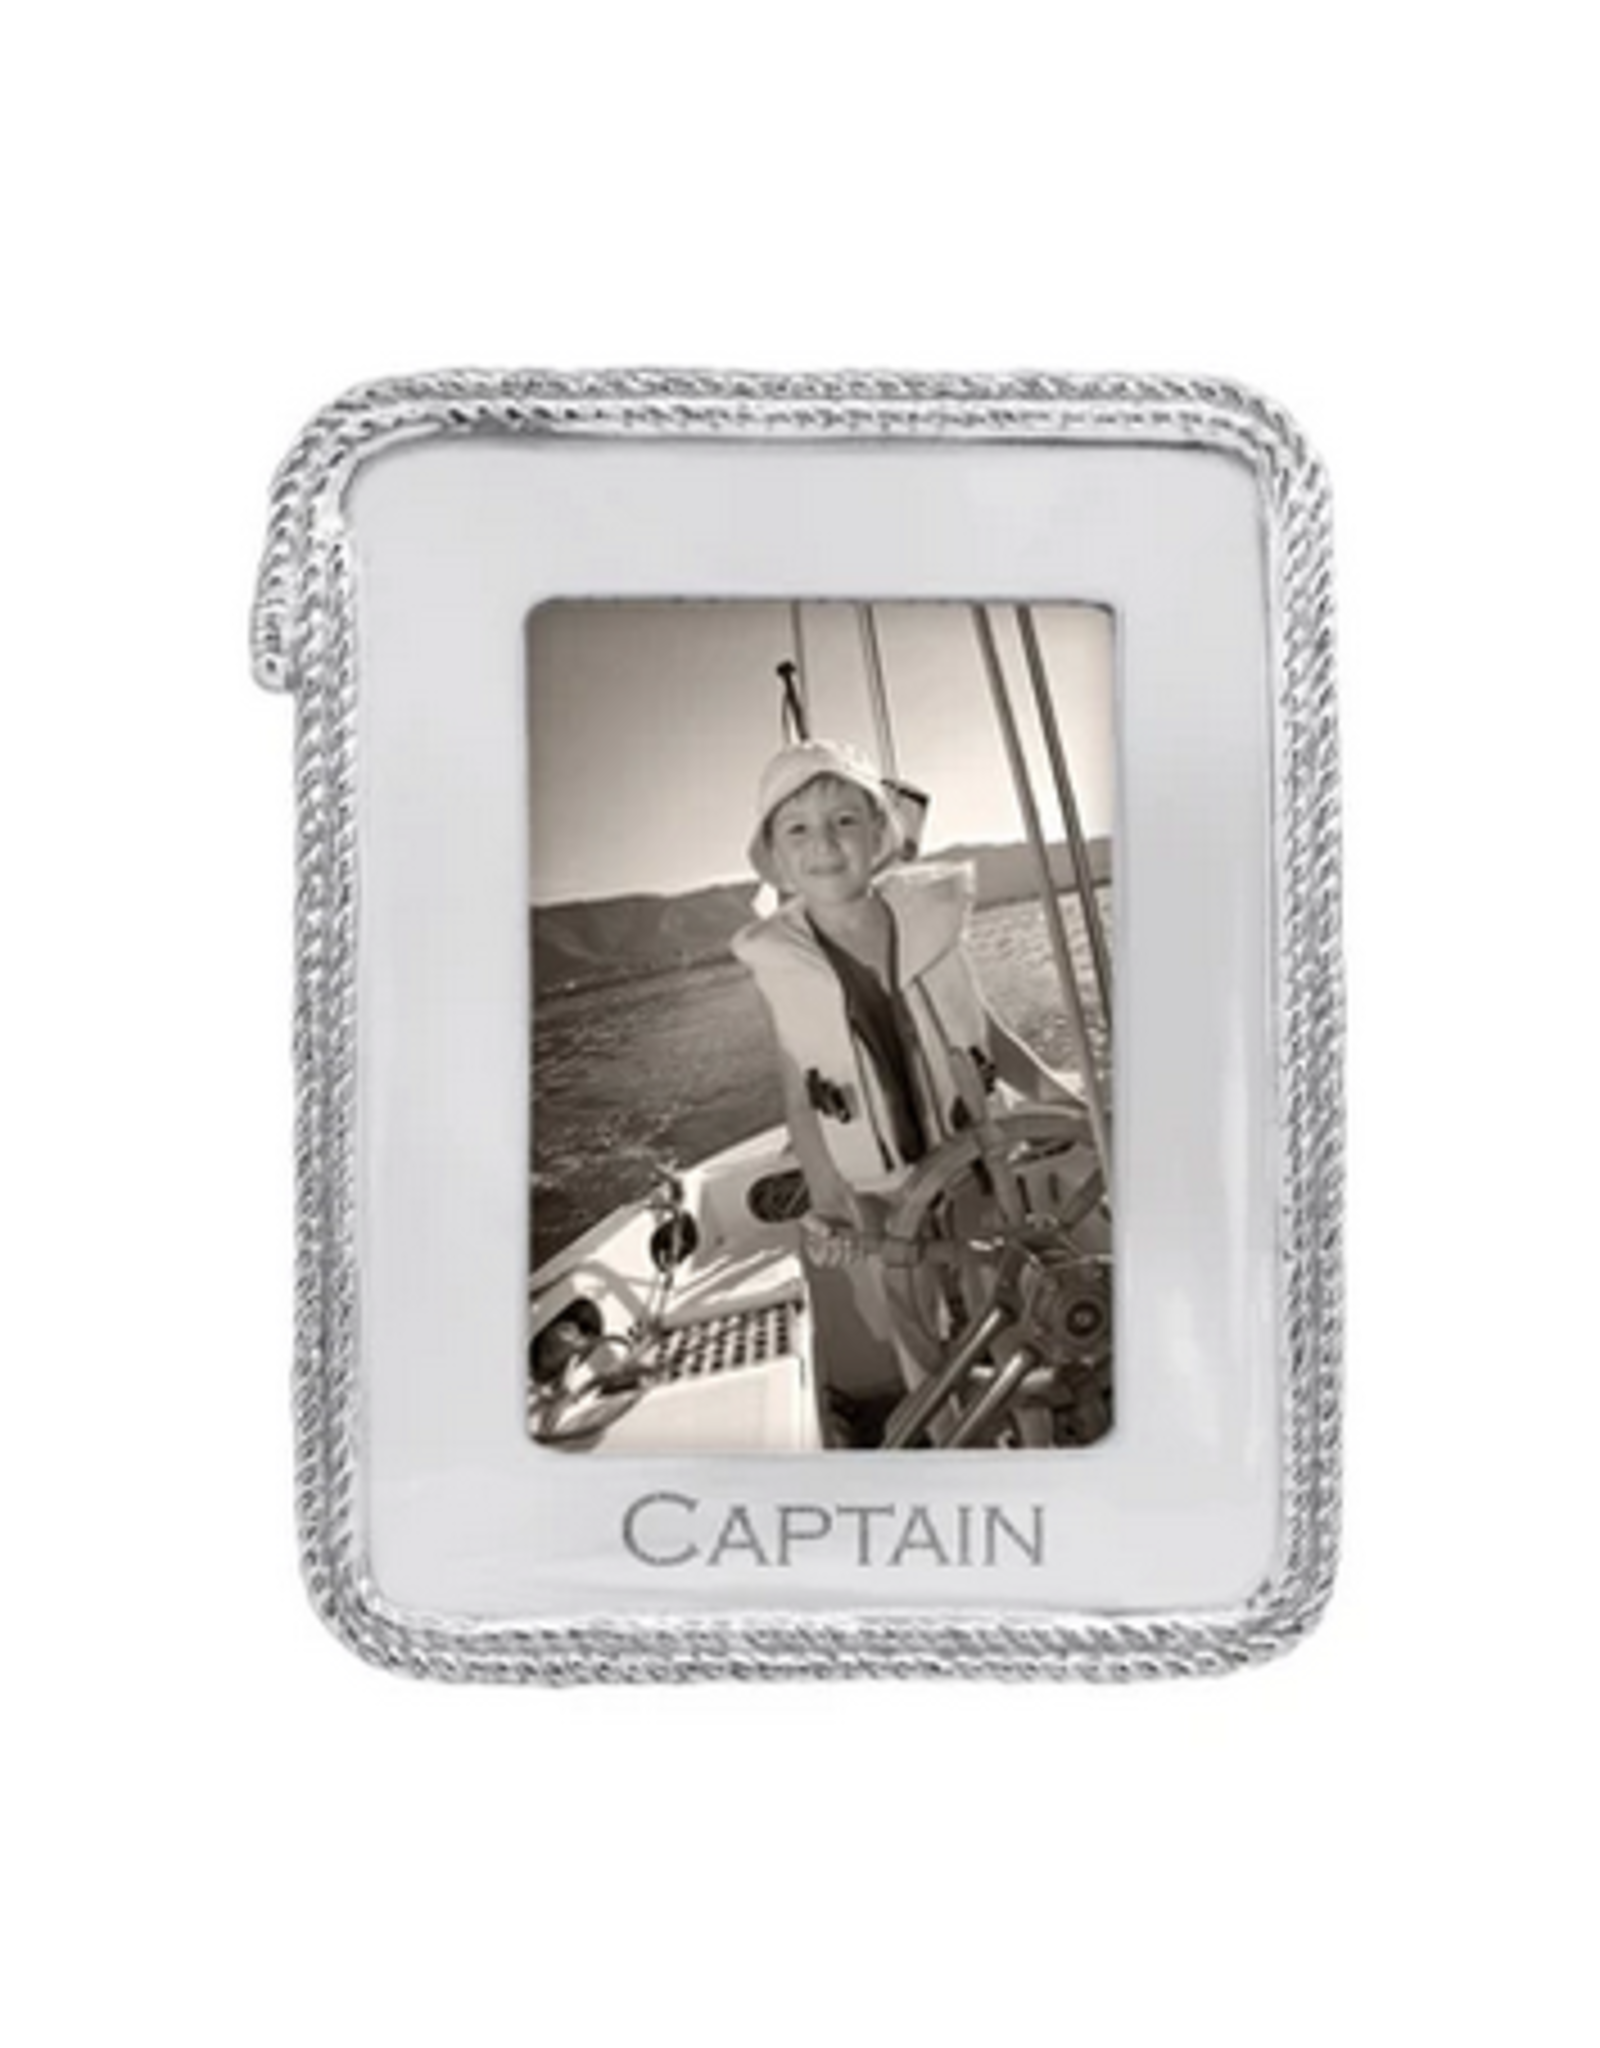 Mariposa Captain Rope Statement 5x7 Frame